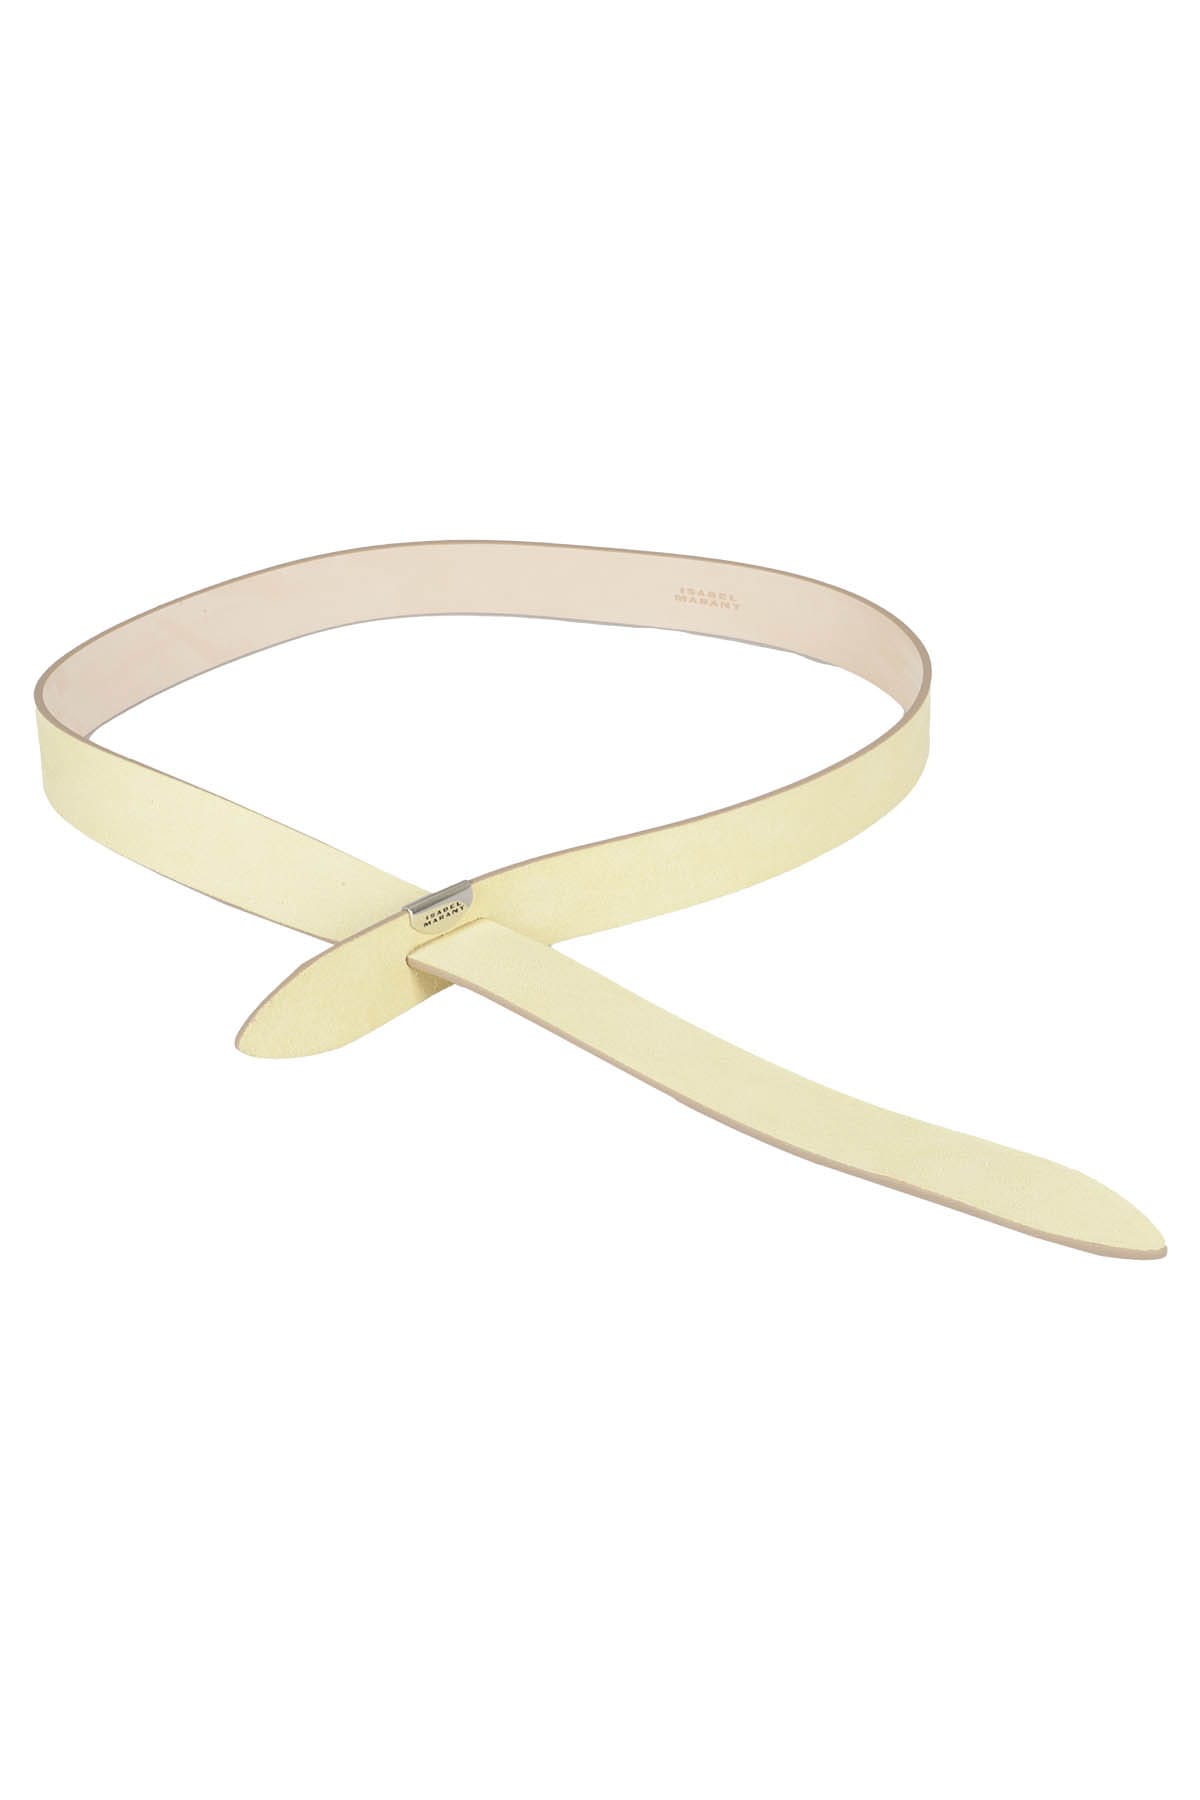 Isabel Marant Lecce Belt In Ly Light Yellow